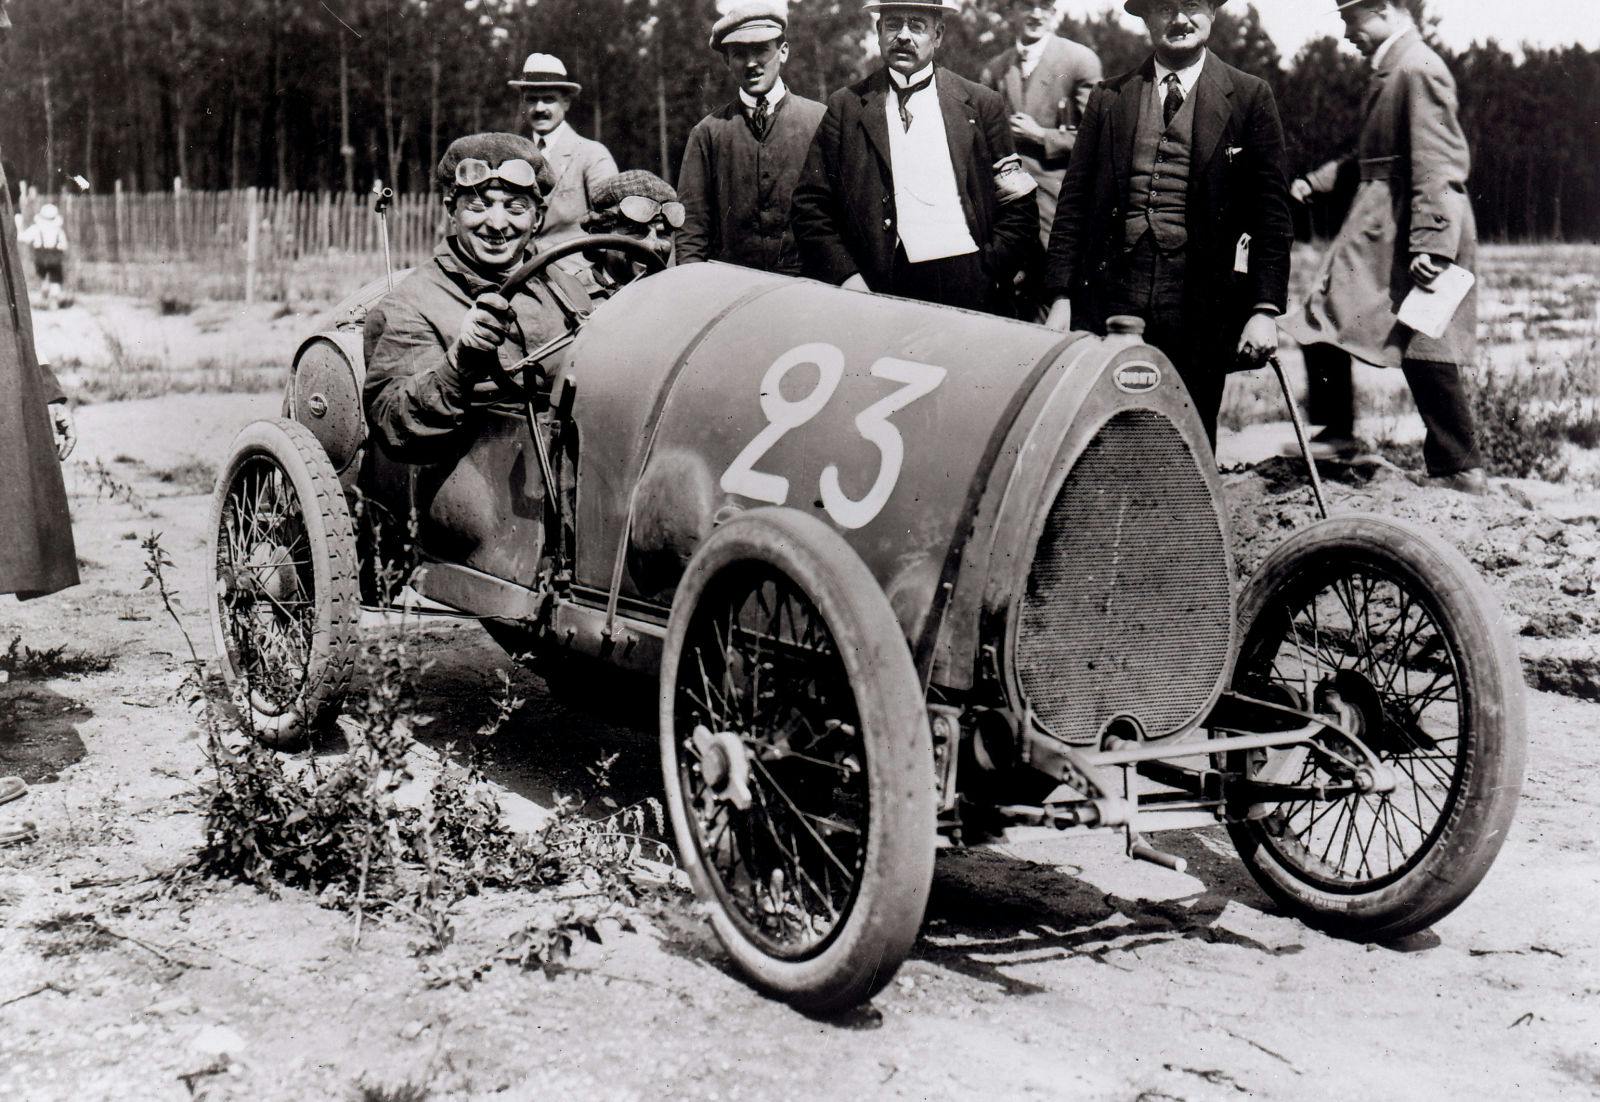 The Bugatti Type 13 Brescia" is one of the most successful racing cars of its time."